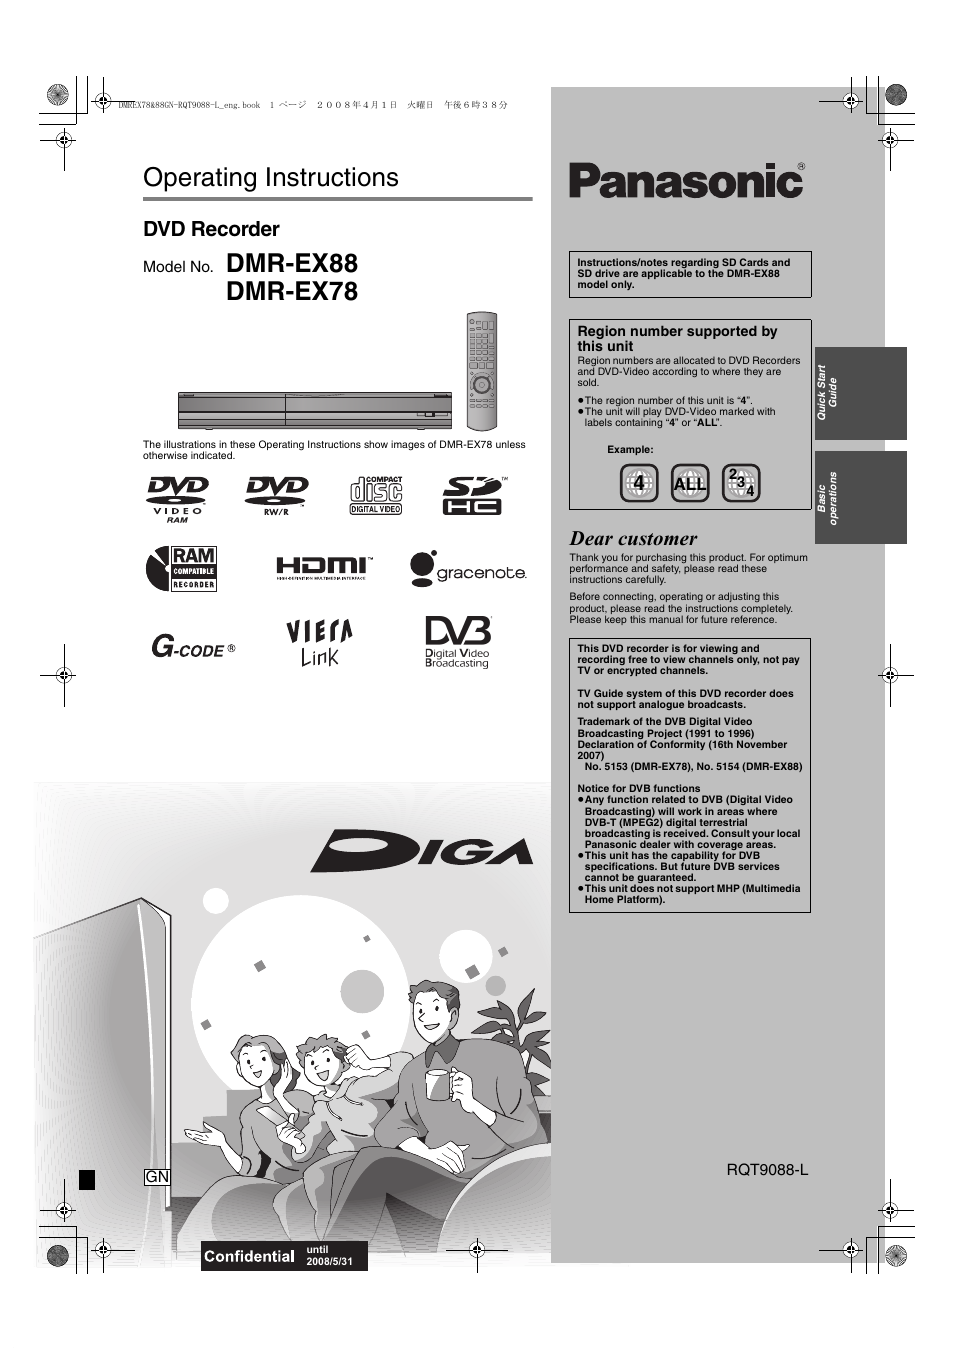 Panasonic DMR-EX78 User Manual | 88 pages | Also for: DMR-EX88